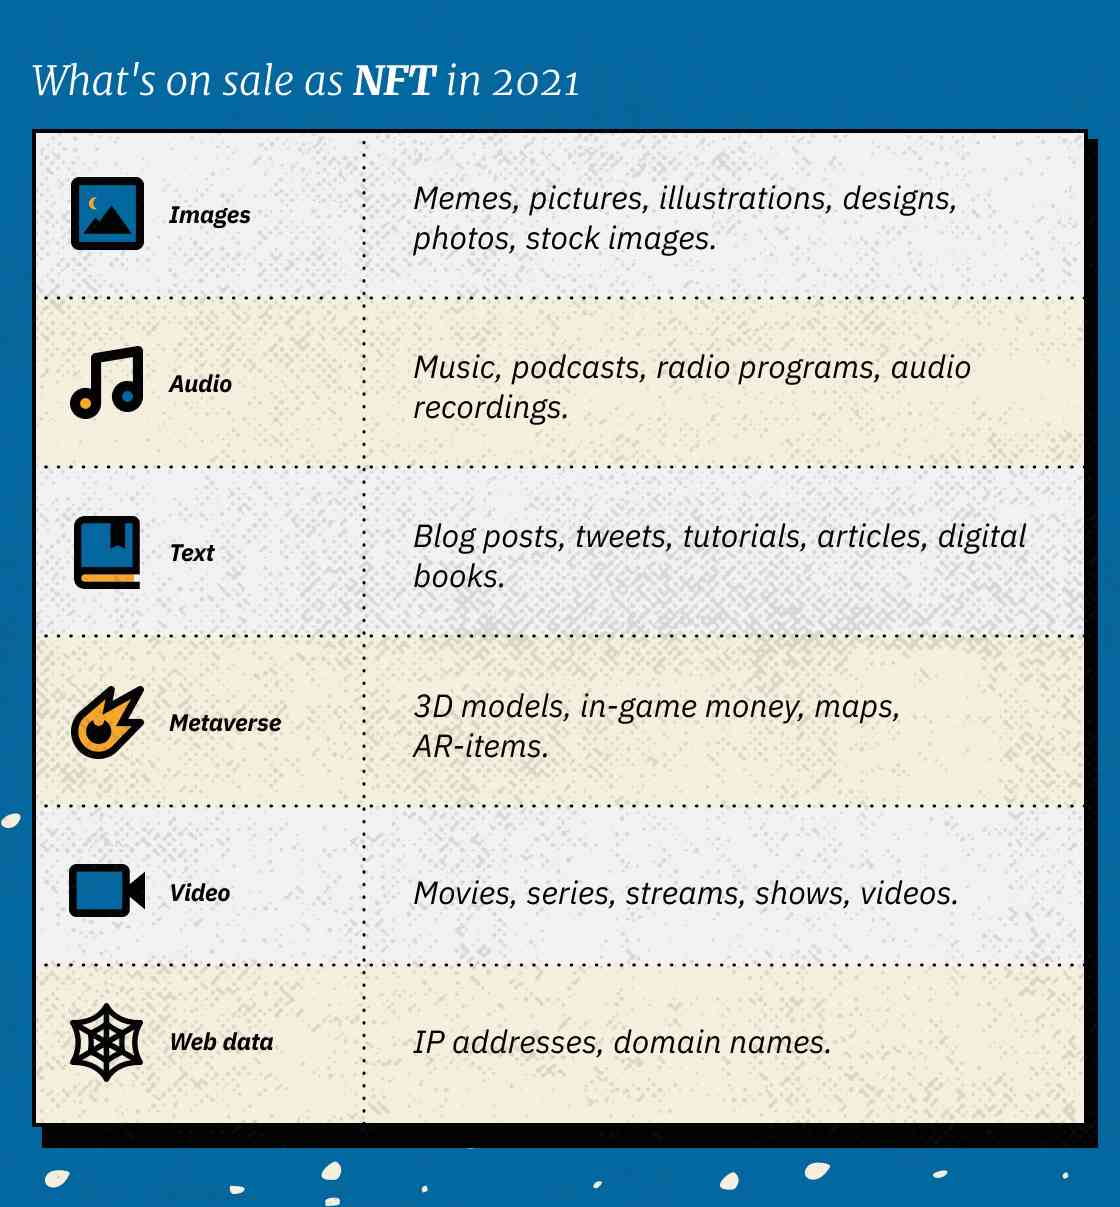 What Has Been Sold as an NFT?